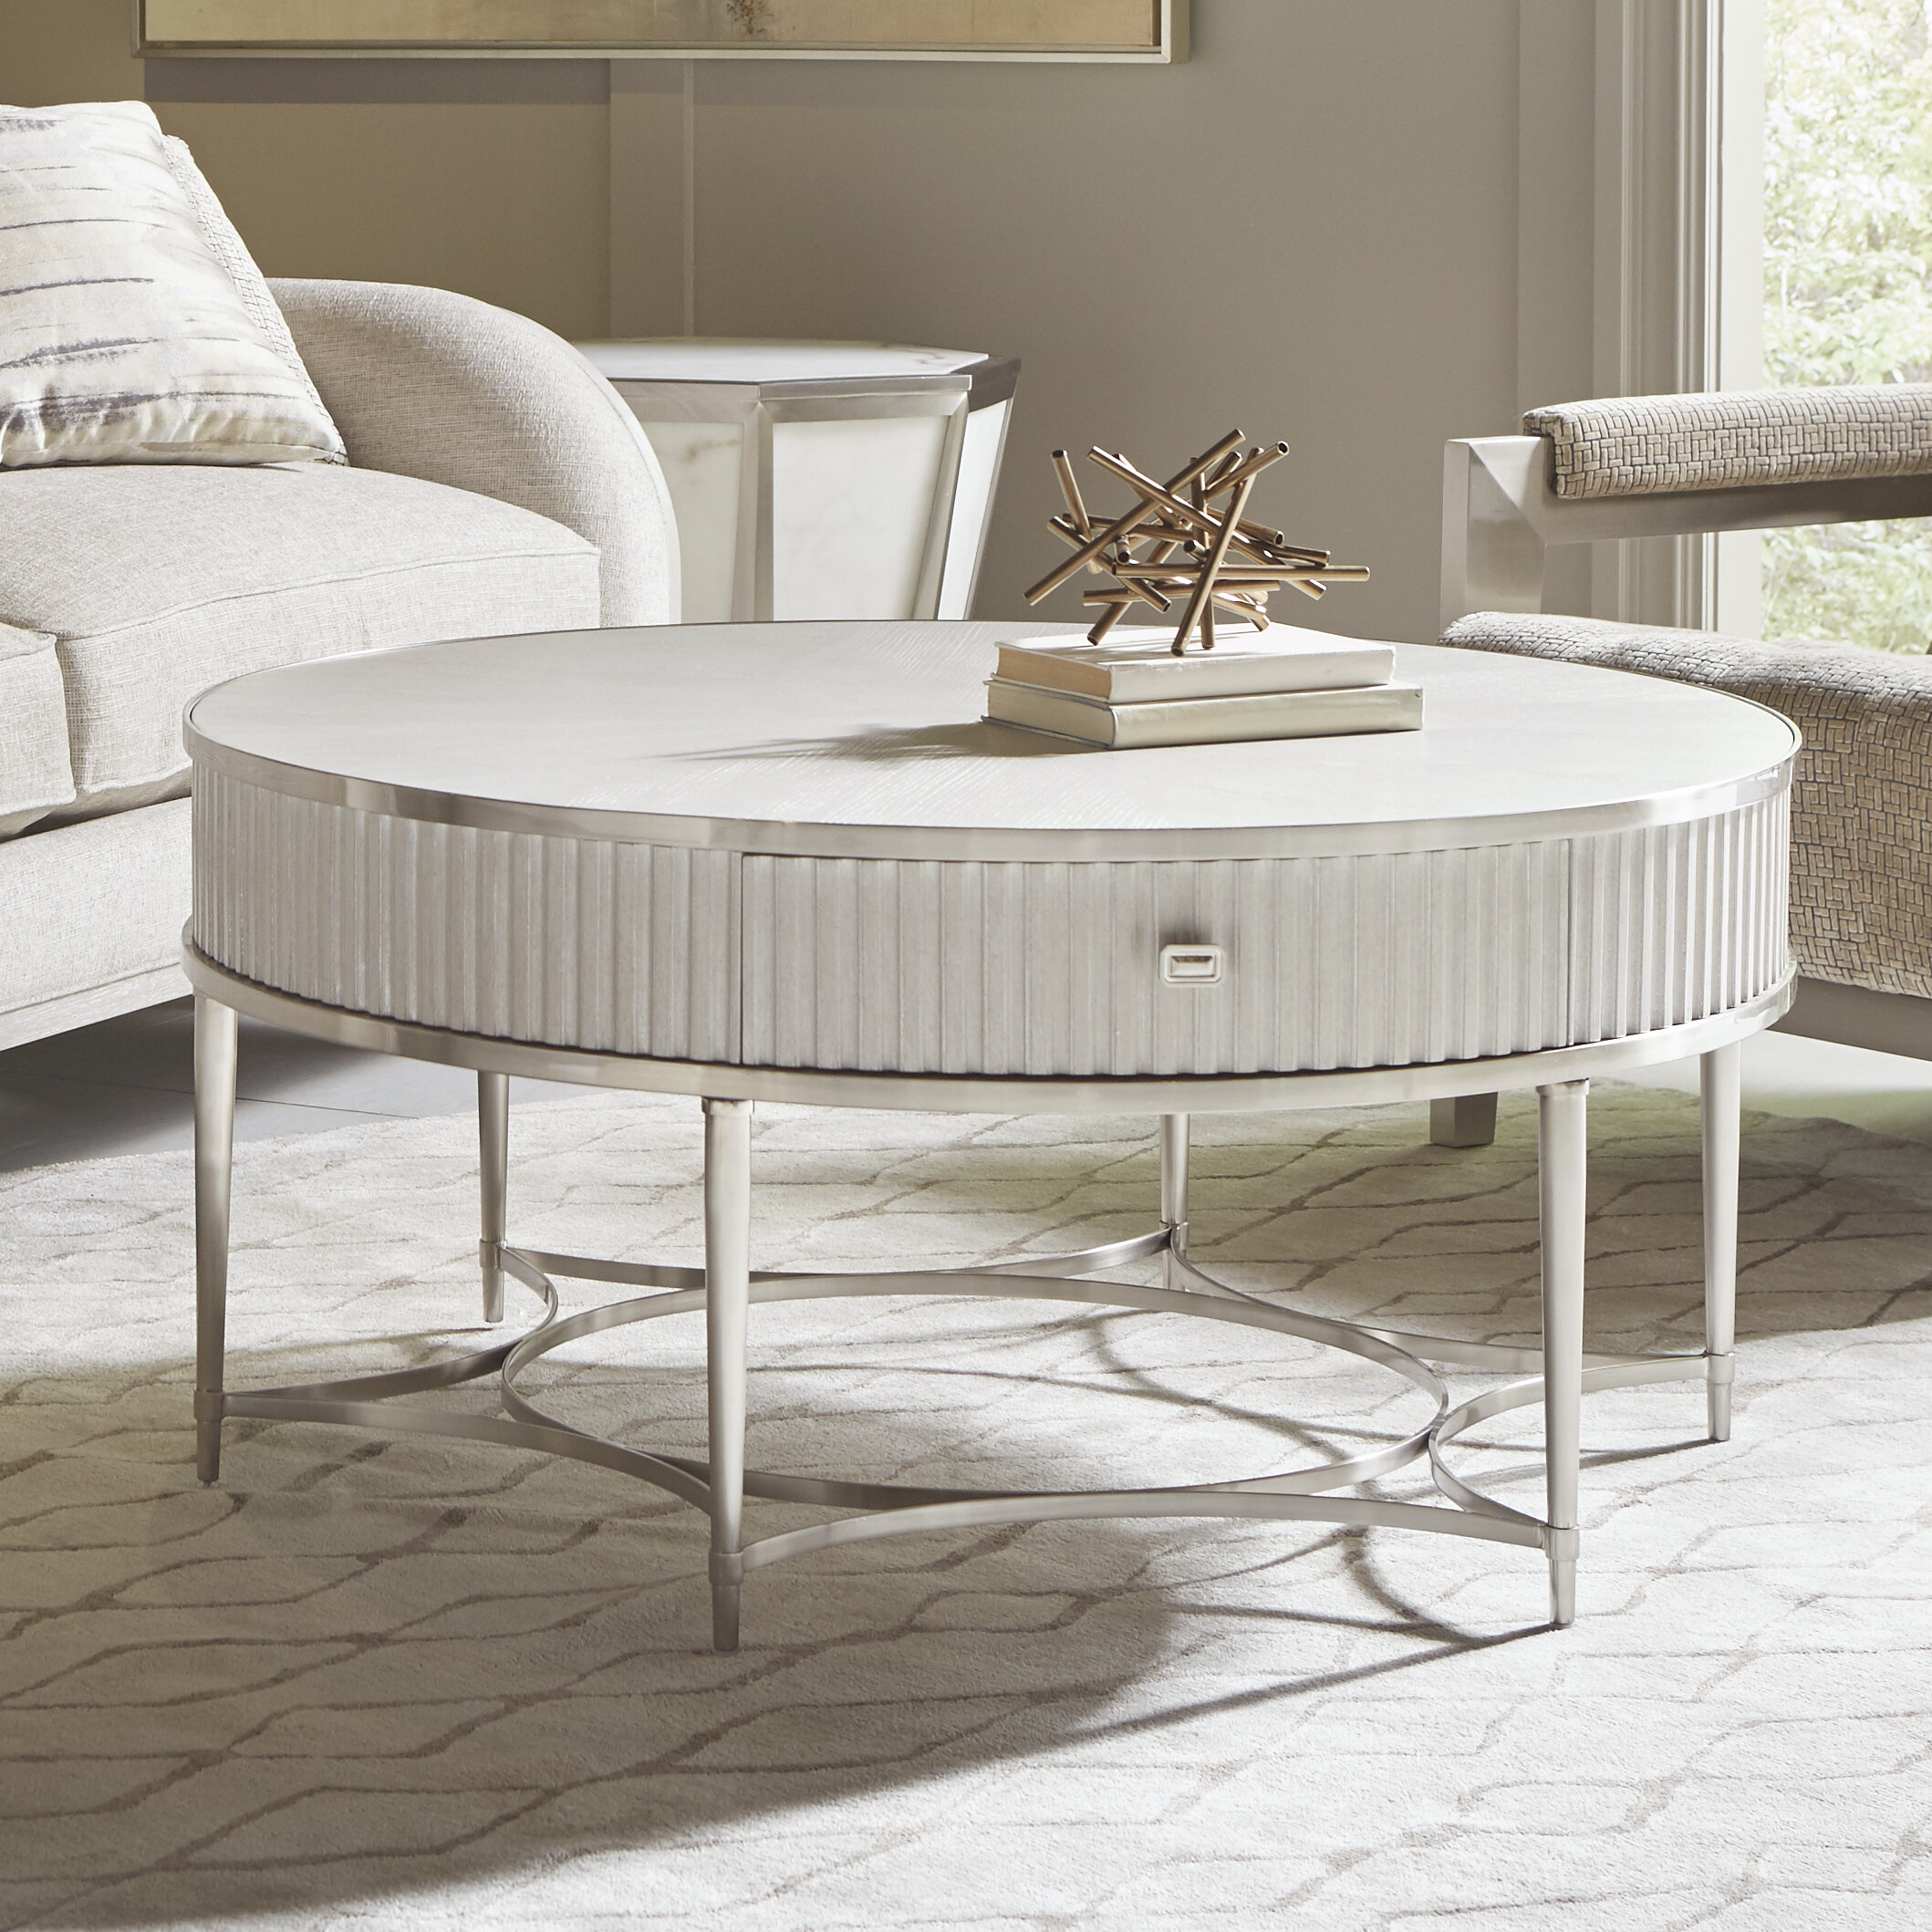 Round Coffee Table With Storage Ottomans Ideas On Foter